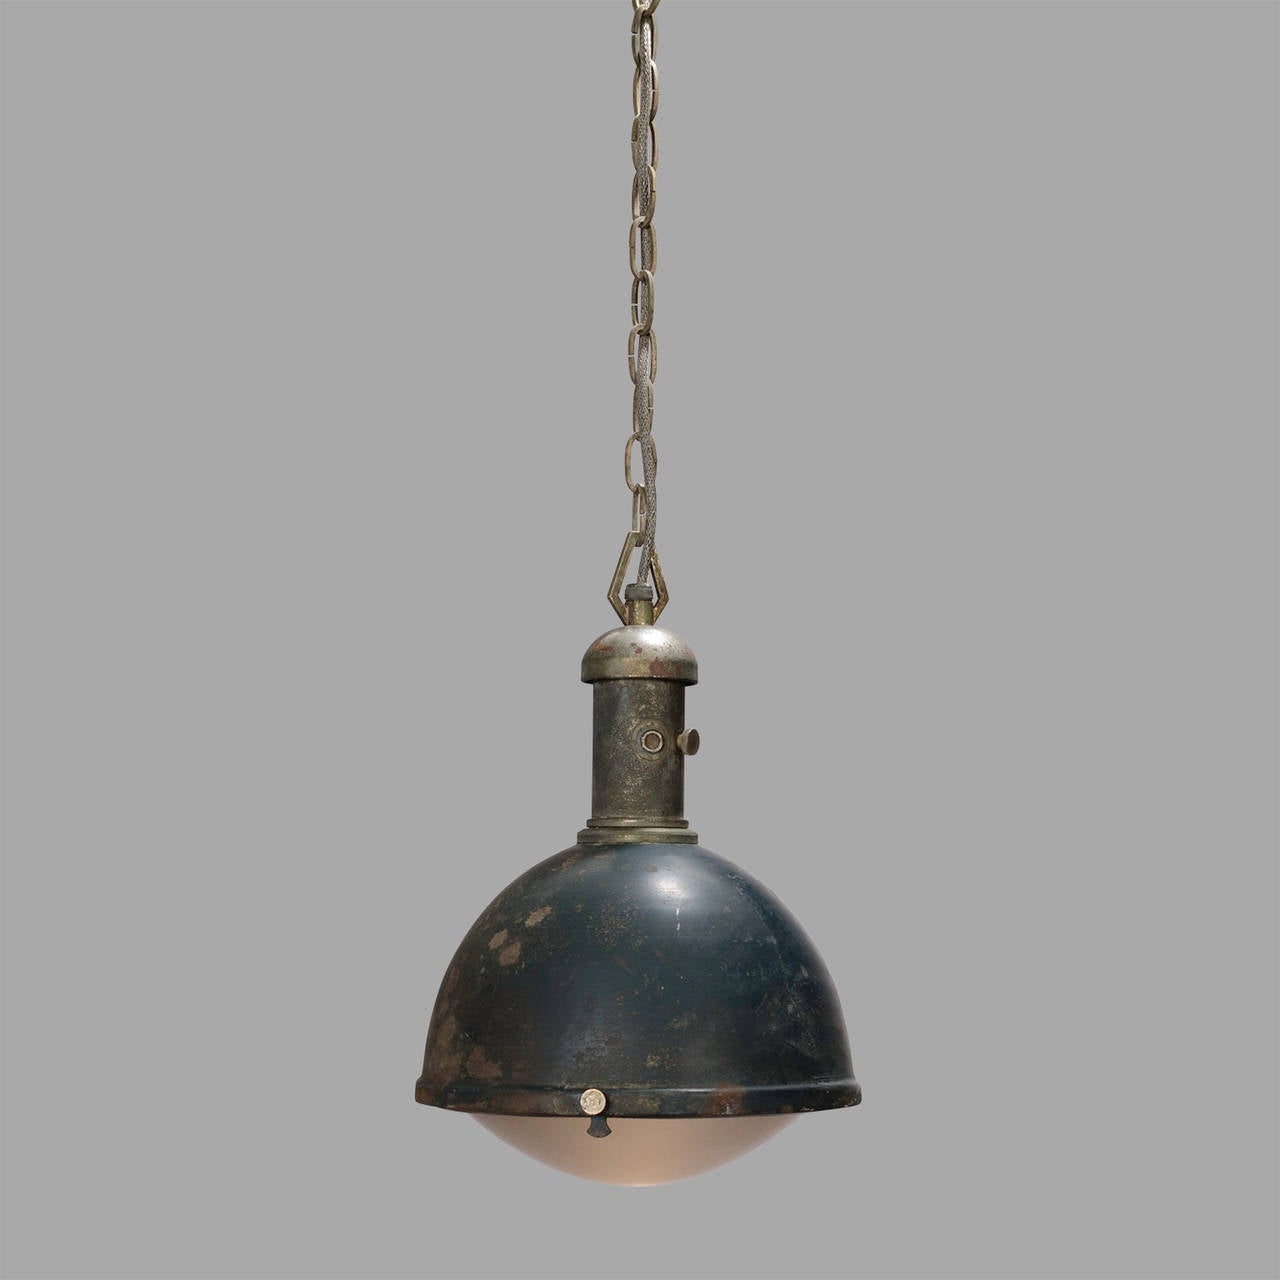 Suspension light model whose interior has a mirror glass reflector. The lower part has a curved sandblasted glass. The whole is in painted metal sheet and nickel-plated steel. Light beam adjusting mechanism with a knob. Contemporary wiring.
 
Some